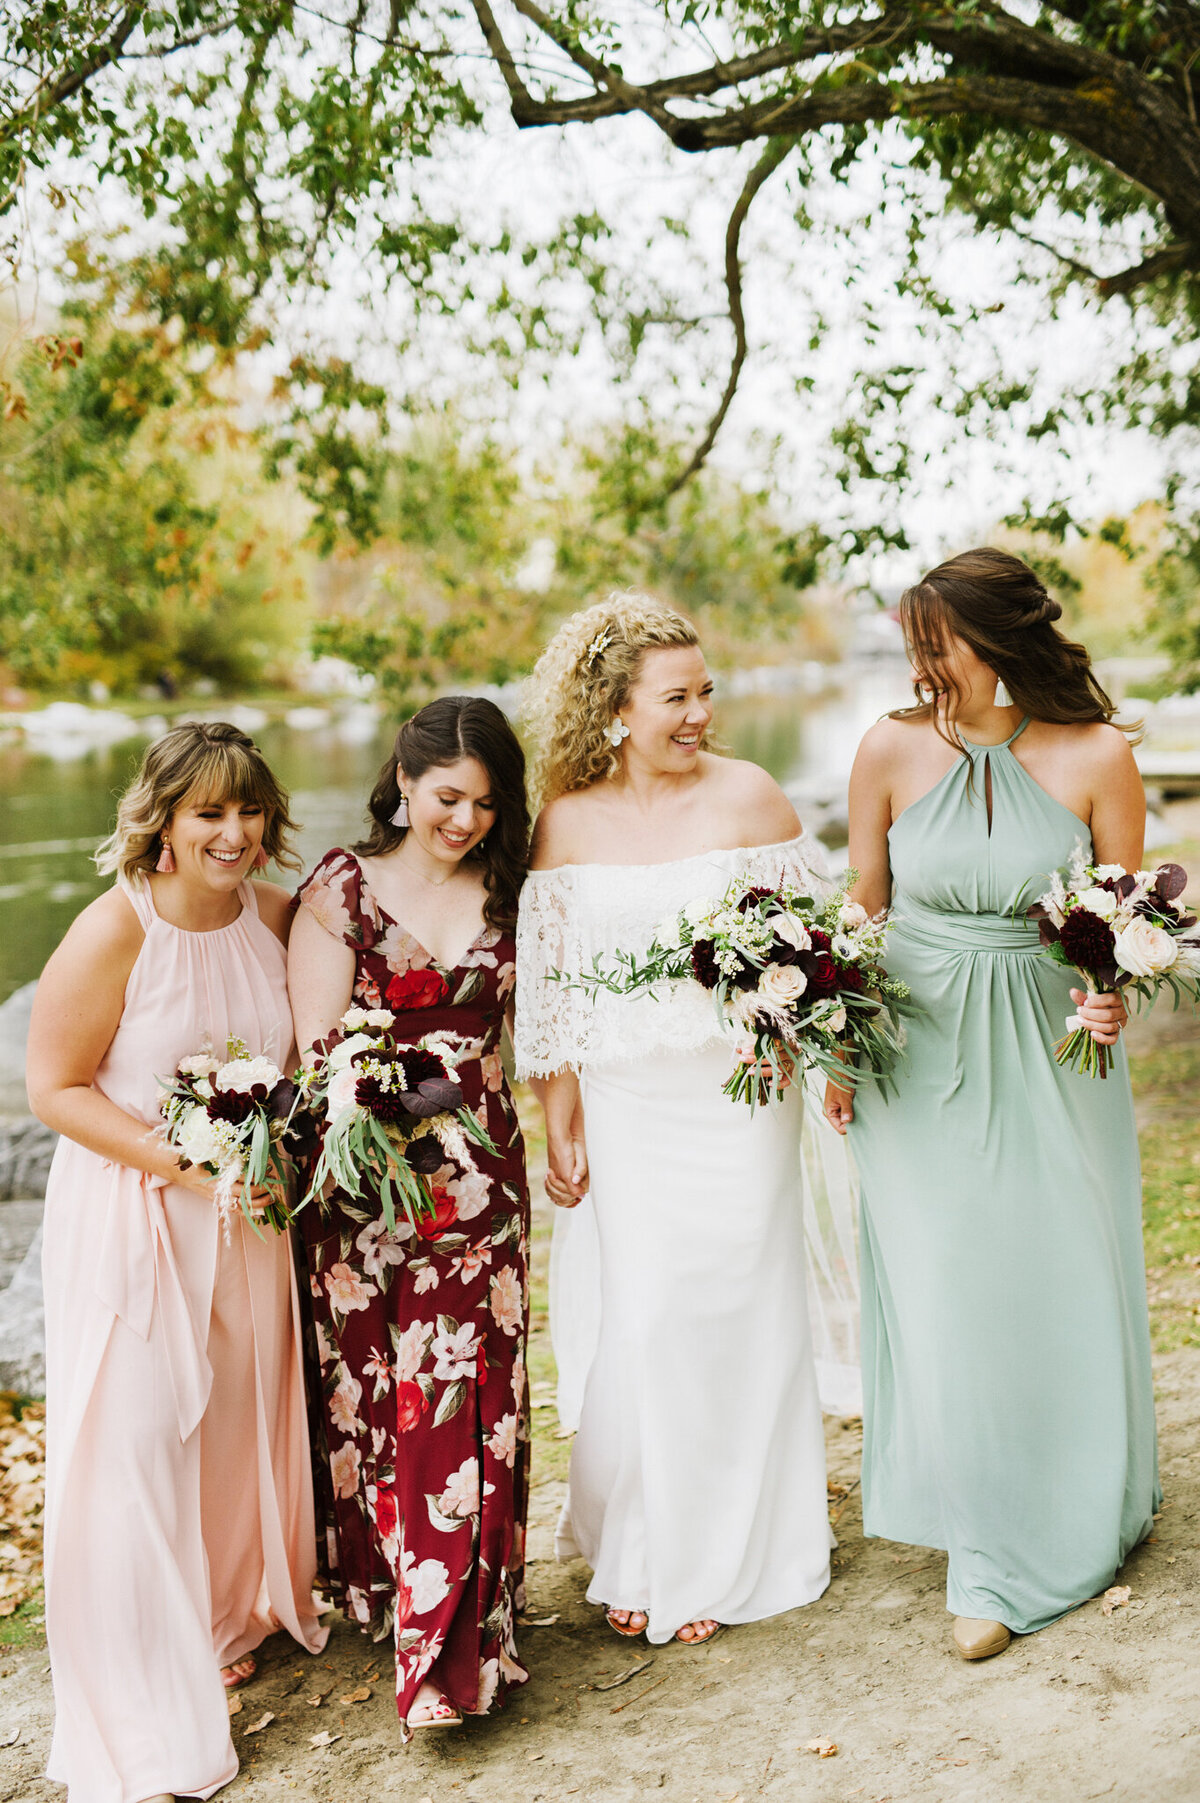 Bride in an off-the-shoulder boho inspired lace gown, with bridemaids in mismatching dresses holding Burgundy and pink autumn florals, captured by Christy D. Swanberg Photography, editorial elopement and wedding photographer in Calgary, Alberta, featured on the Bronte Bride Vendor Guide.